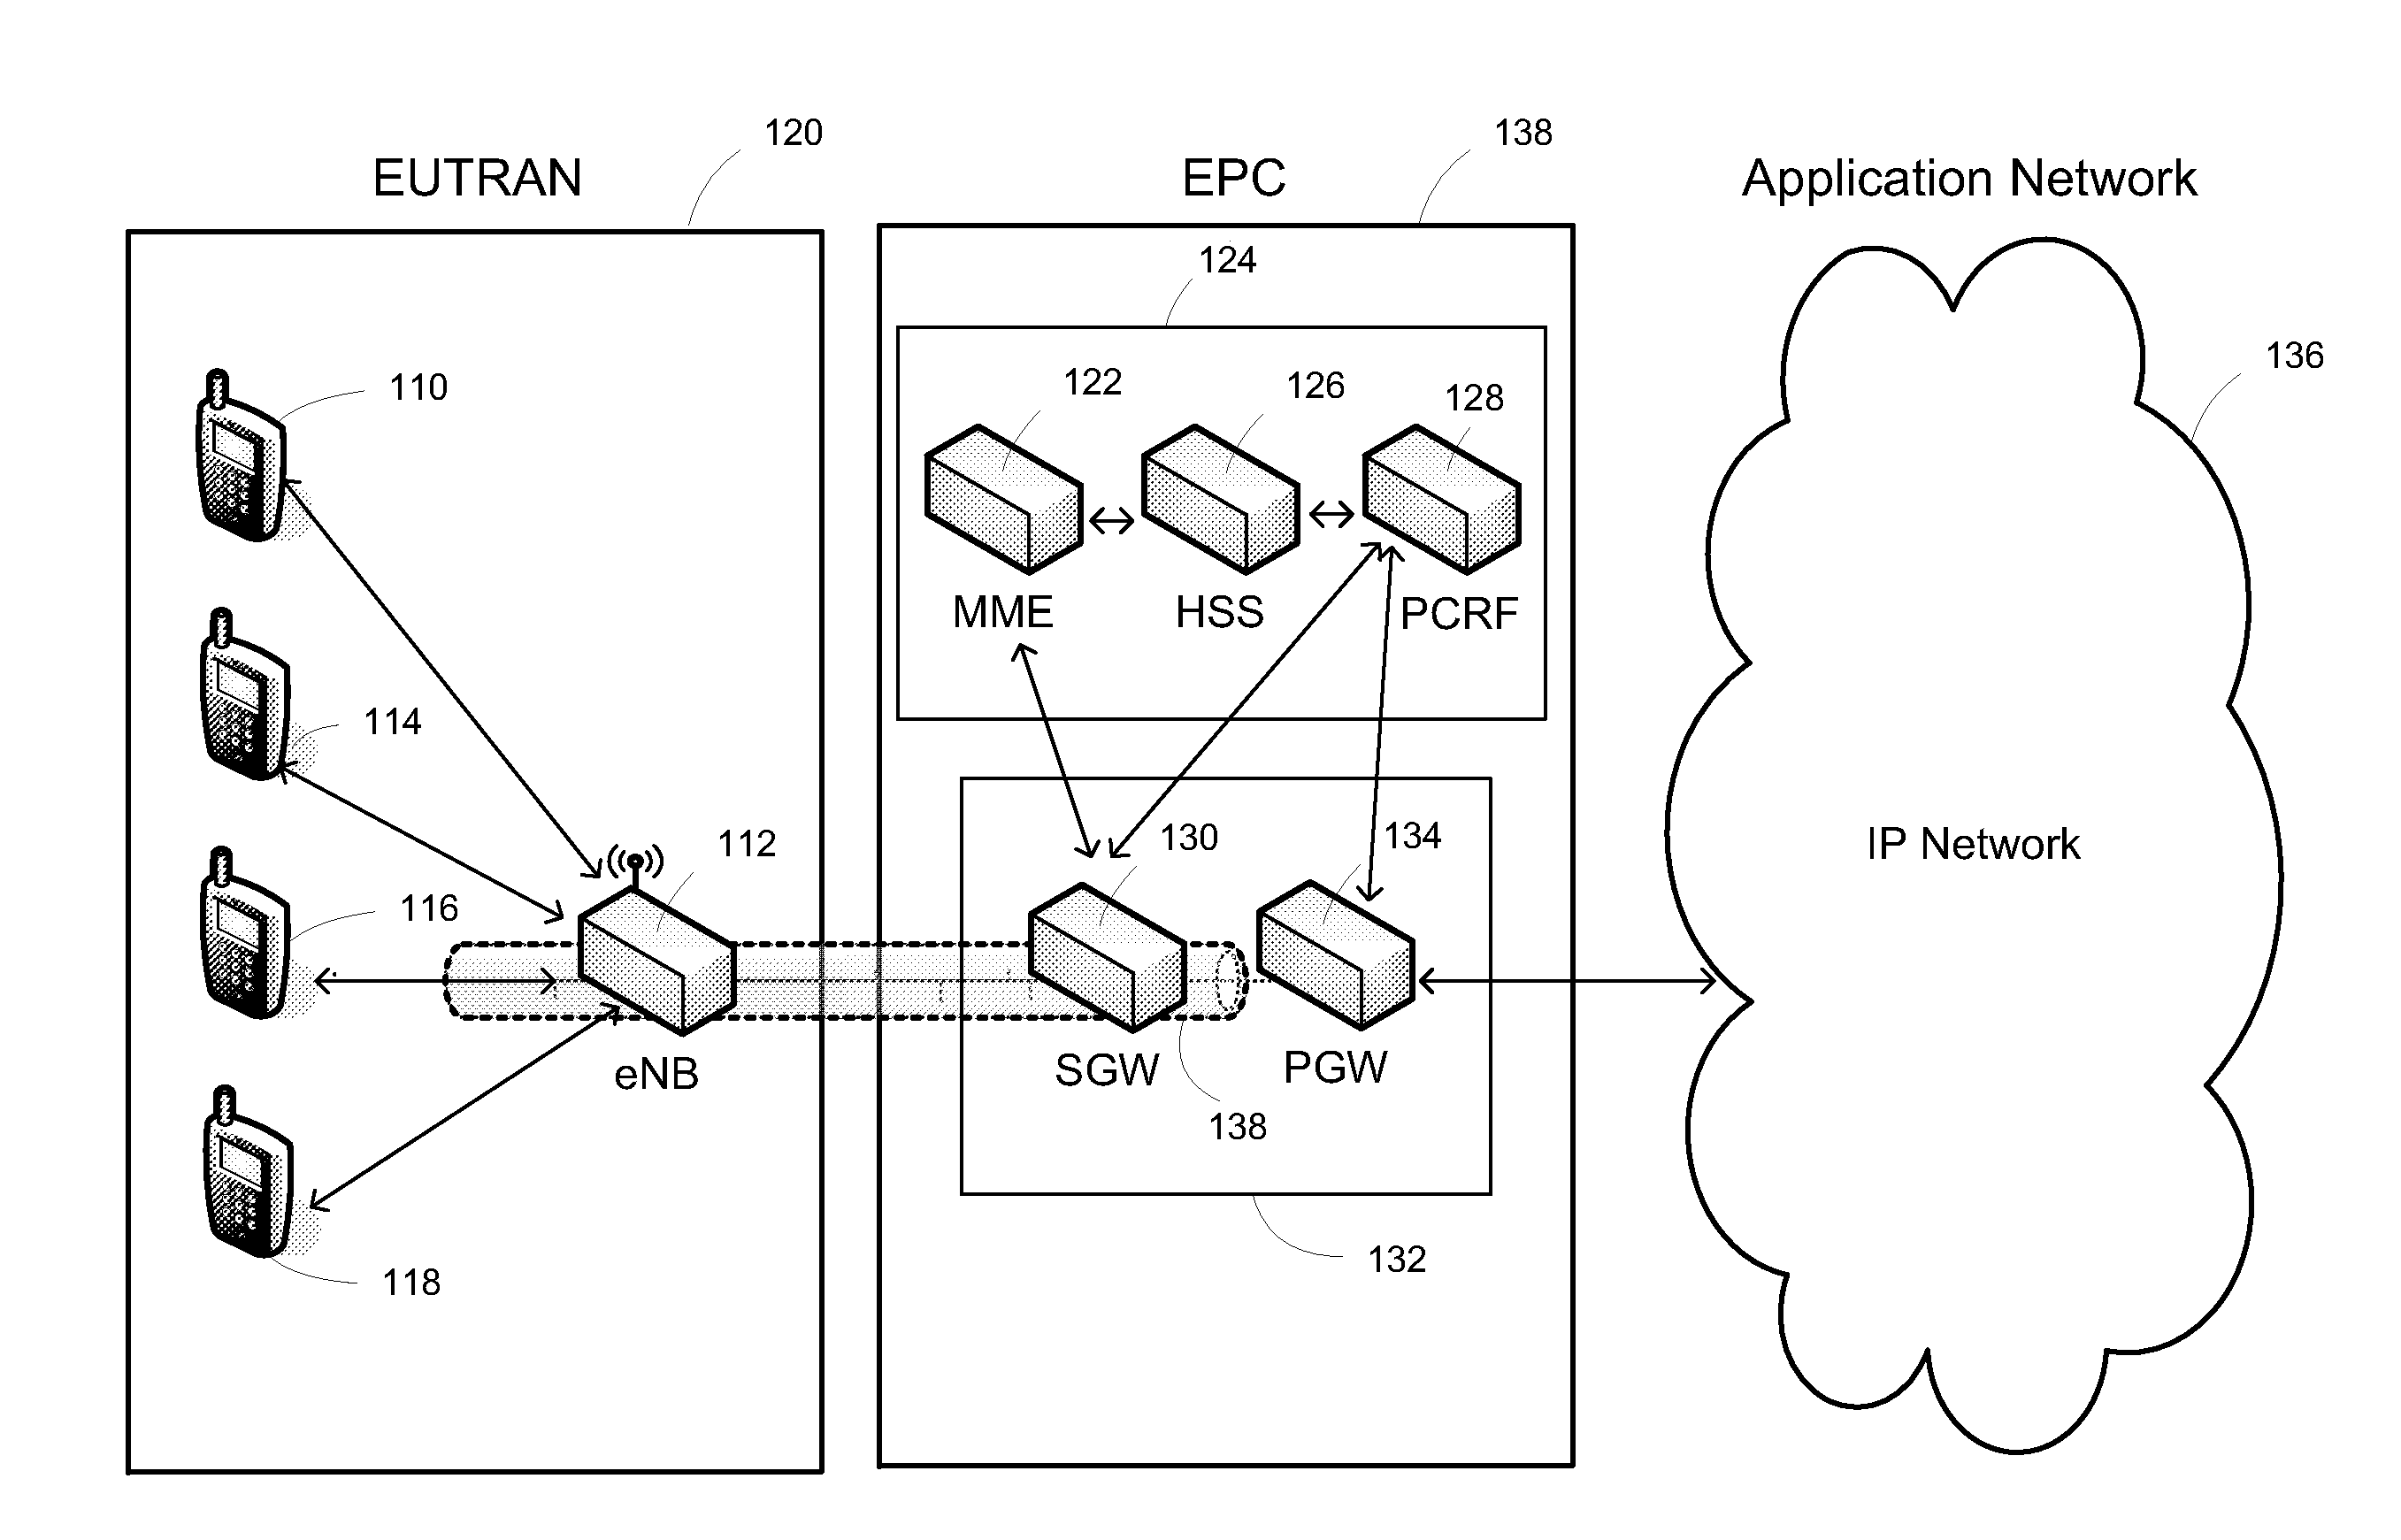 Soft retention for call admission control in communication networks